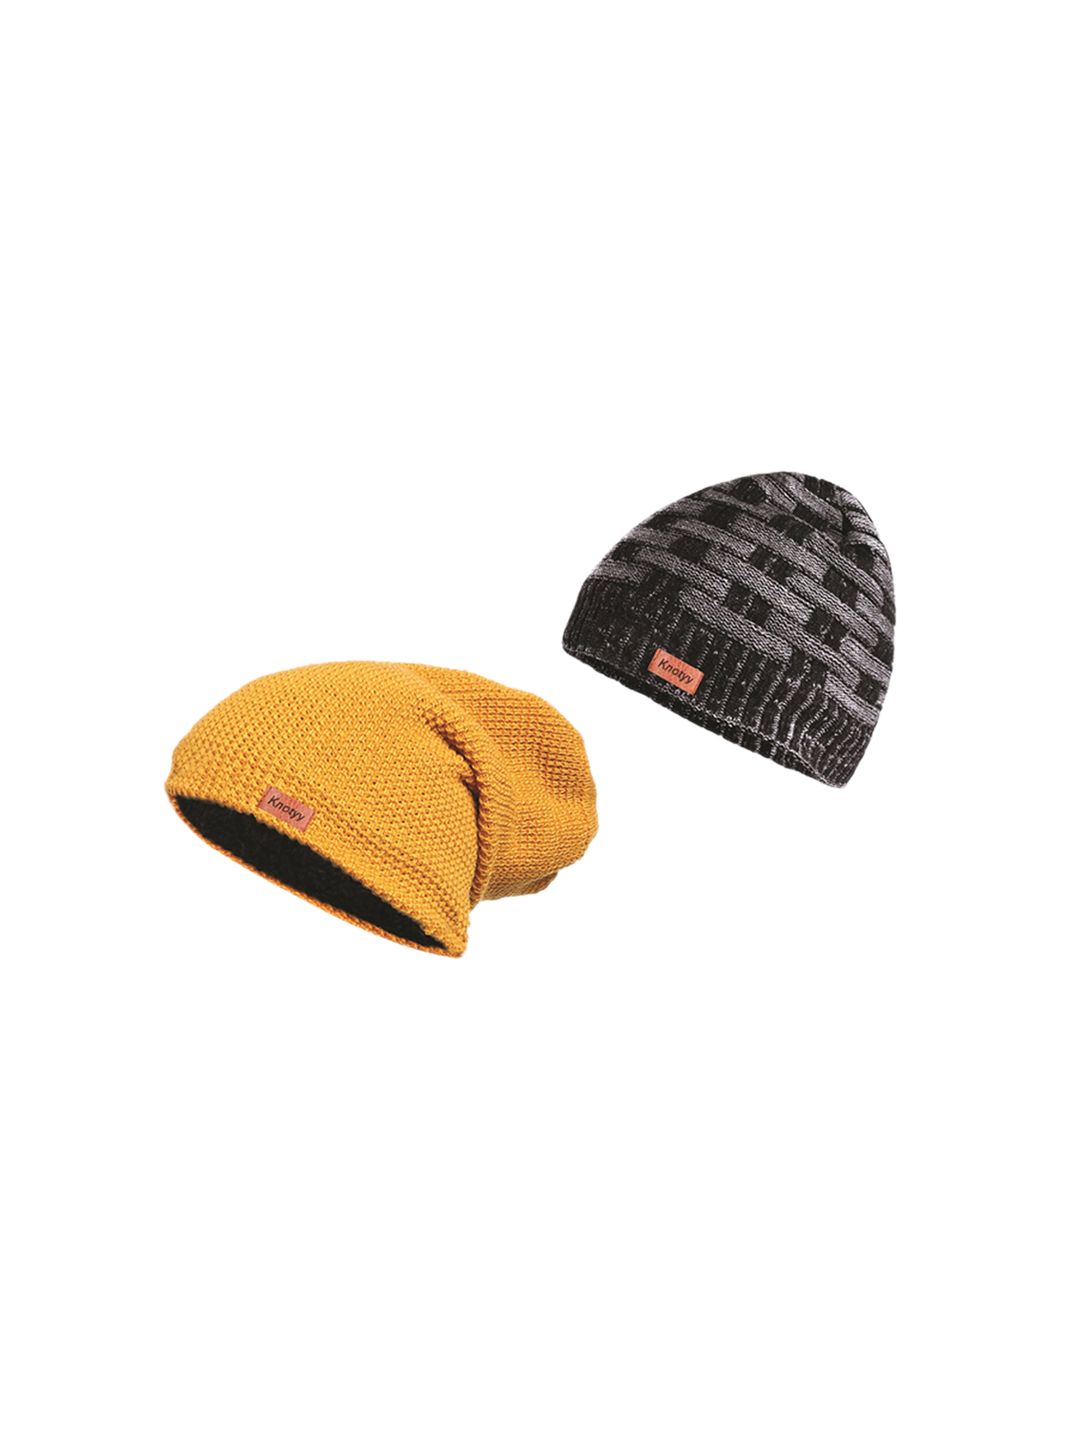 Knotyy Unisex Pack Of 2 Beanies Price in India